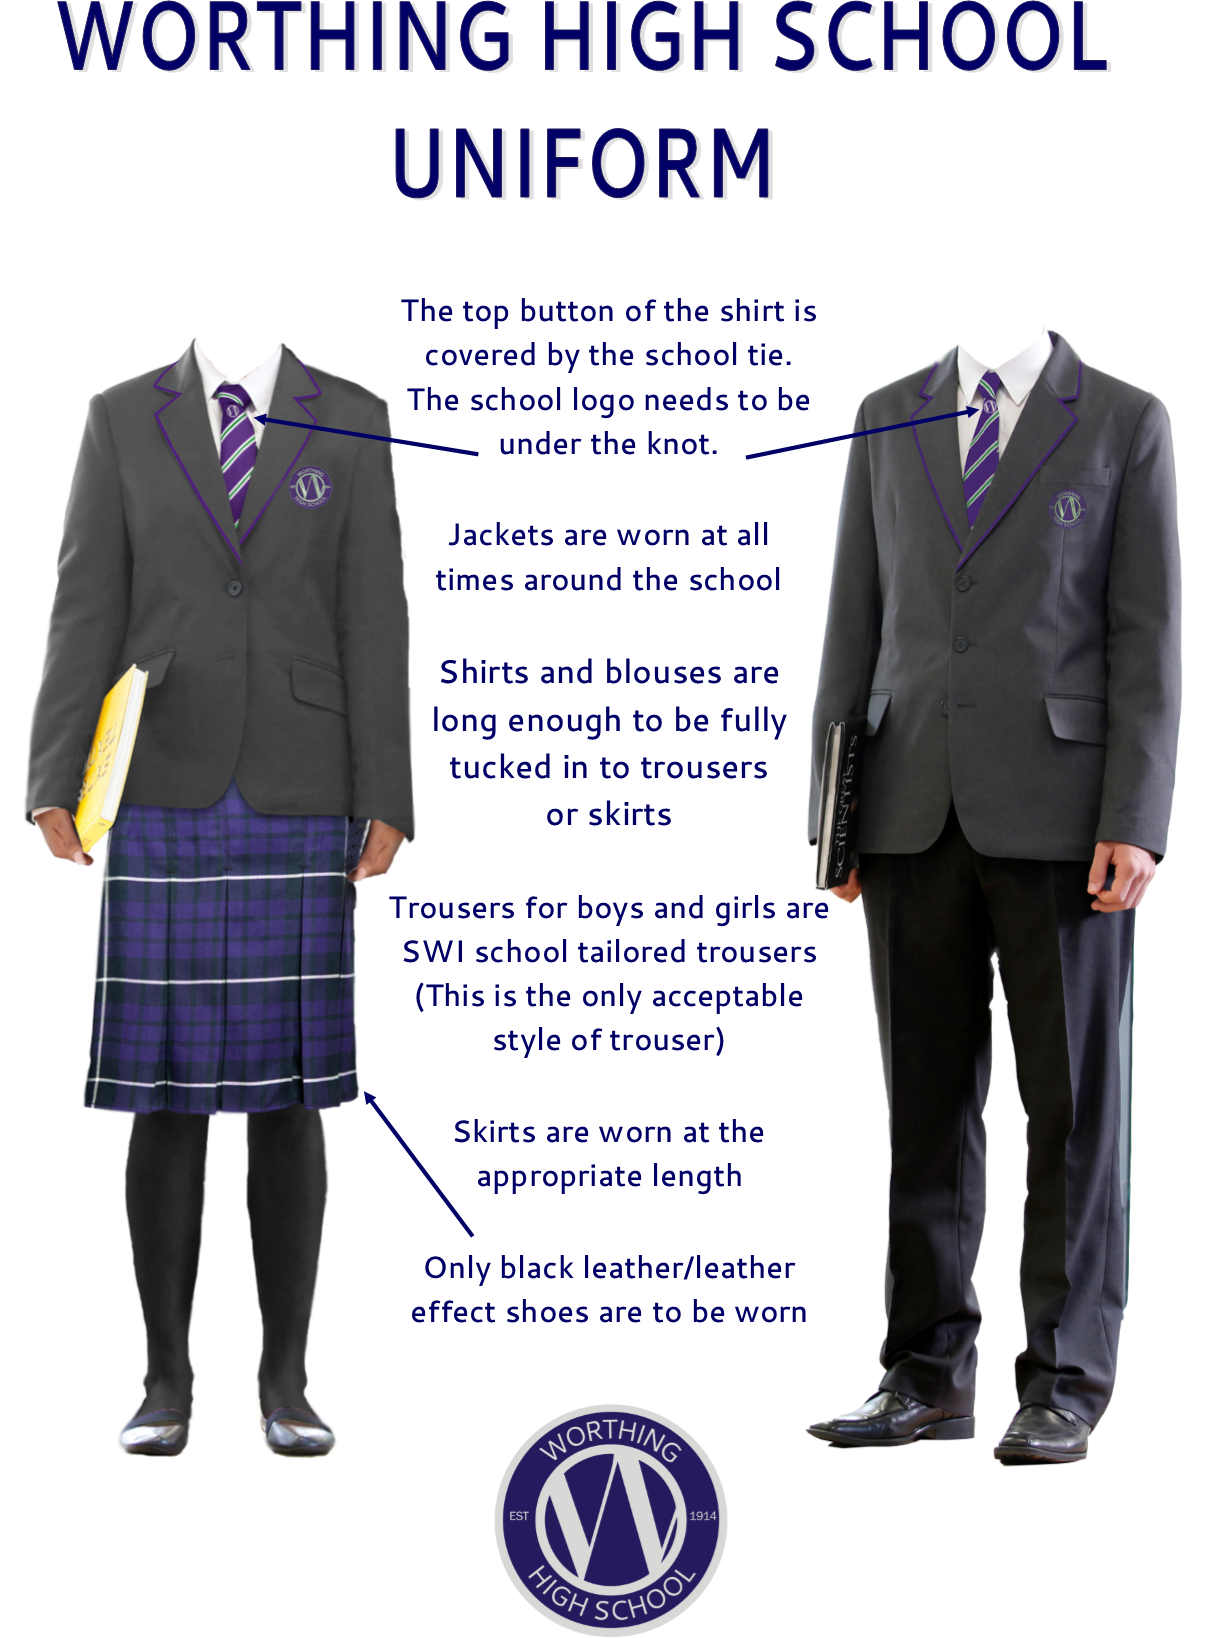 should students have to wear school uniforms